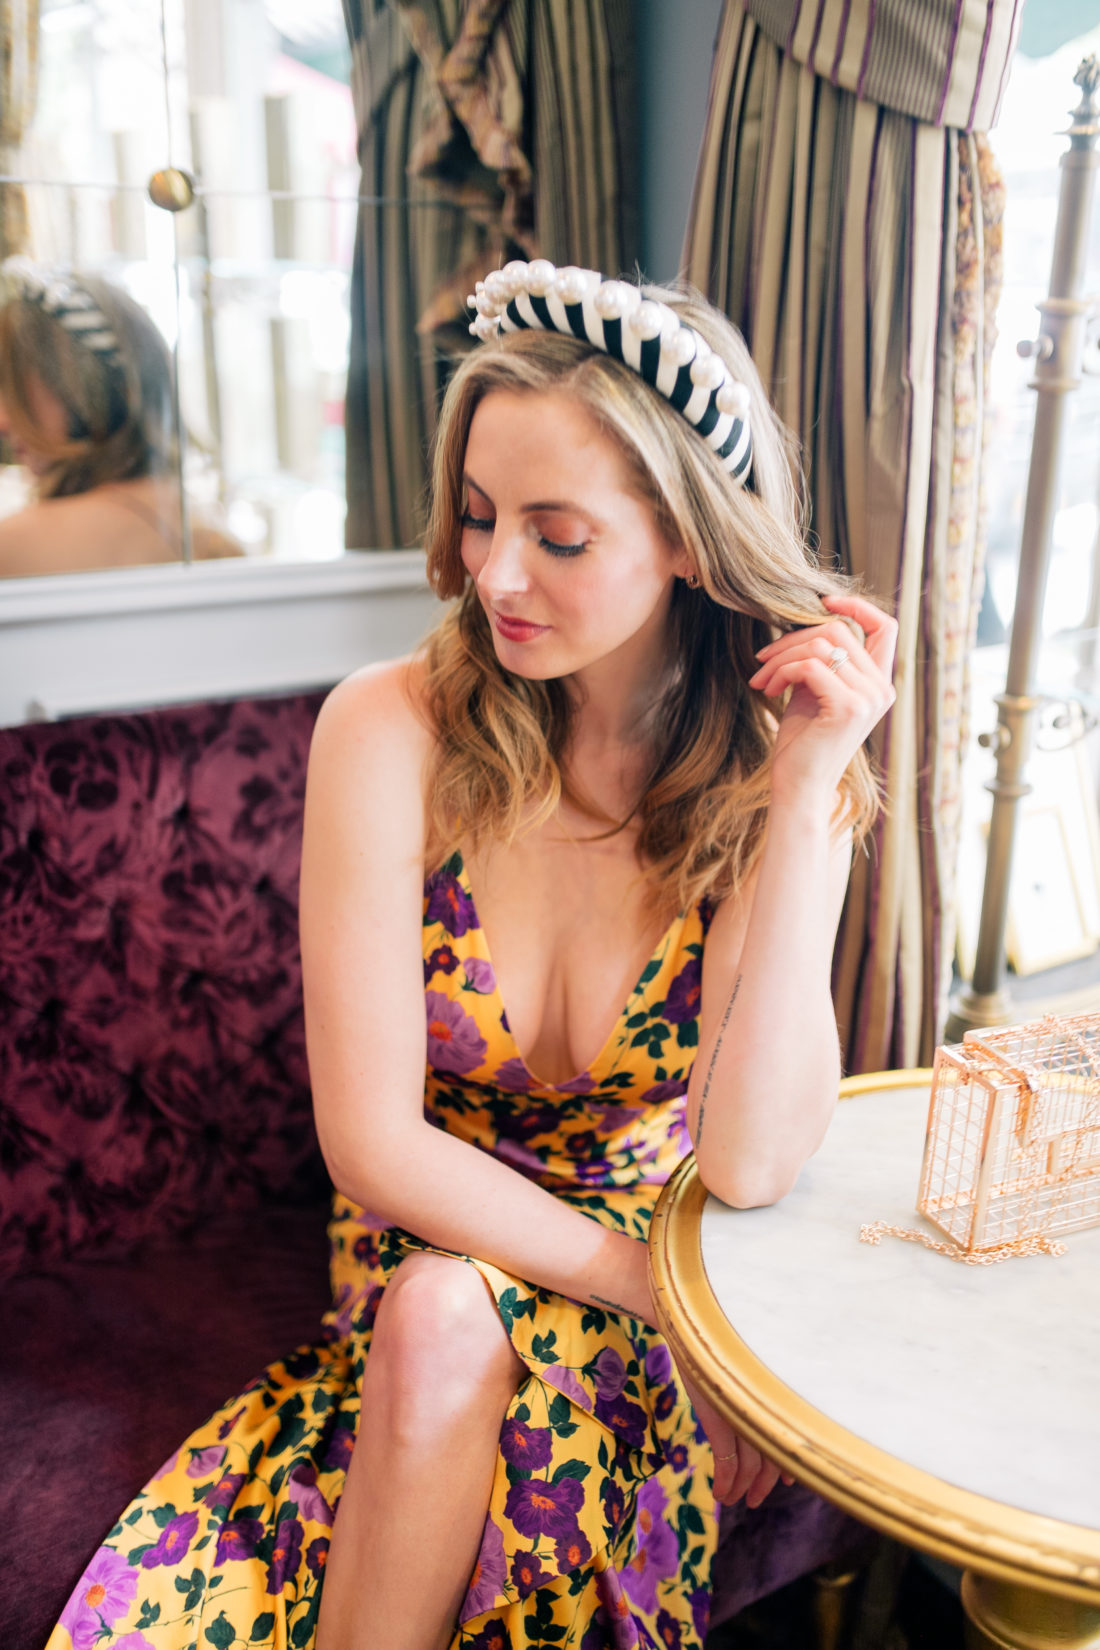 Eva Amurri Martino wears a bright flowery dress and a statement headband at Ladurée on the Upper East Side